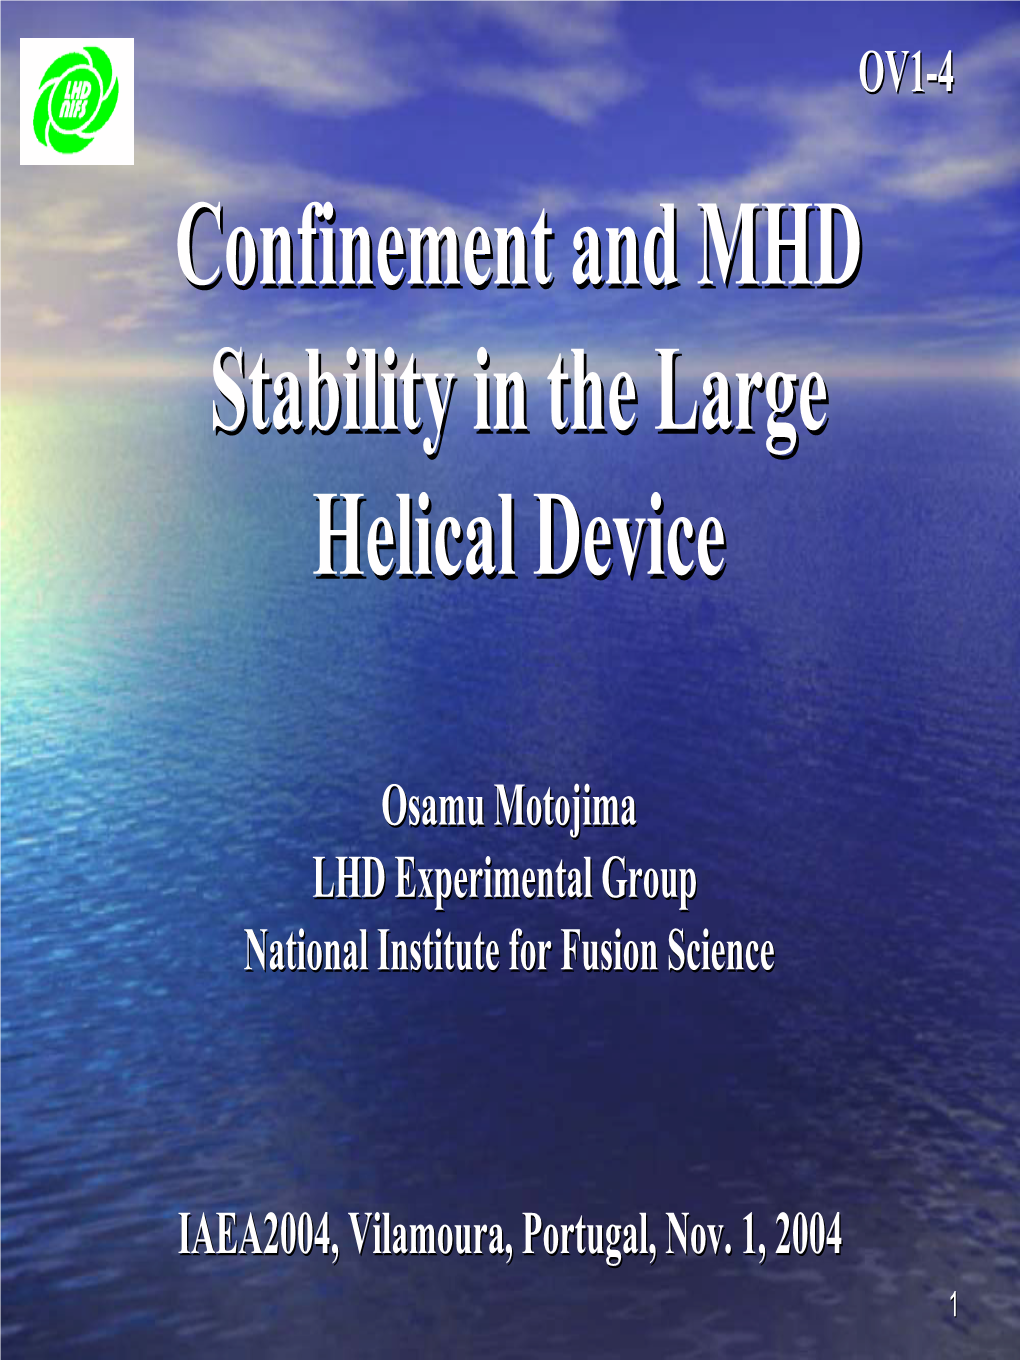 Confinement and Stability in the Large Helical Device